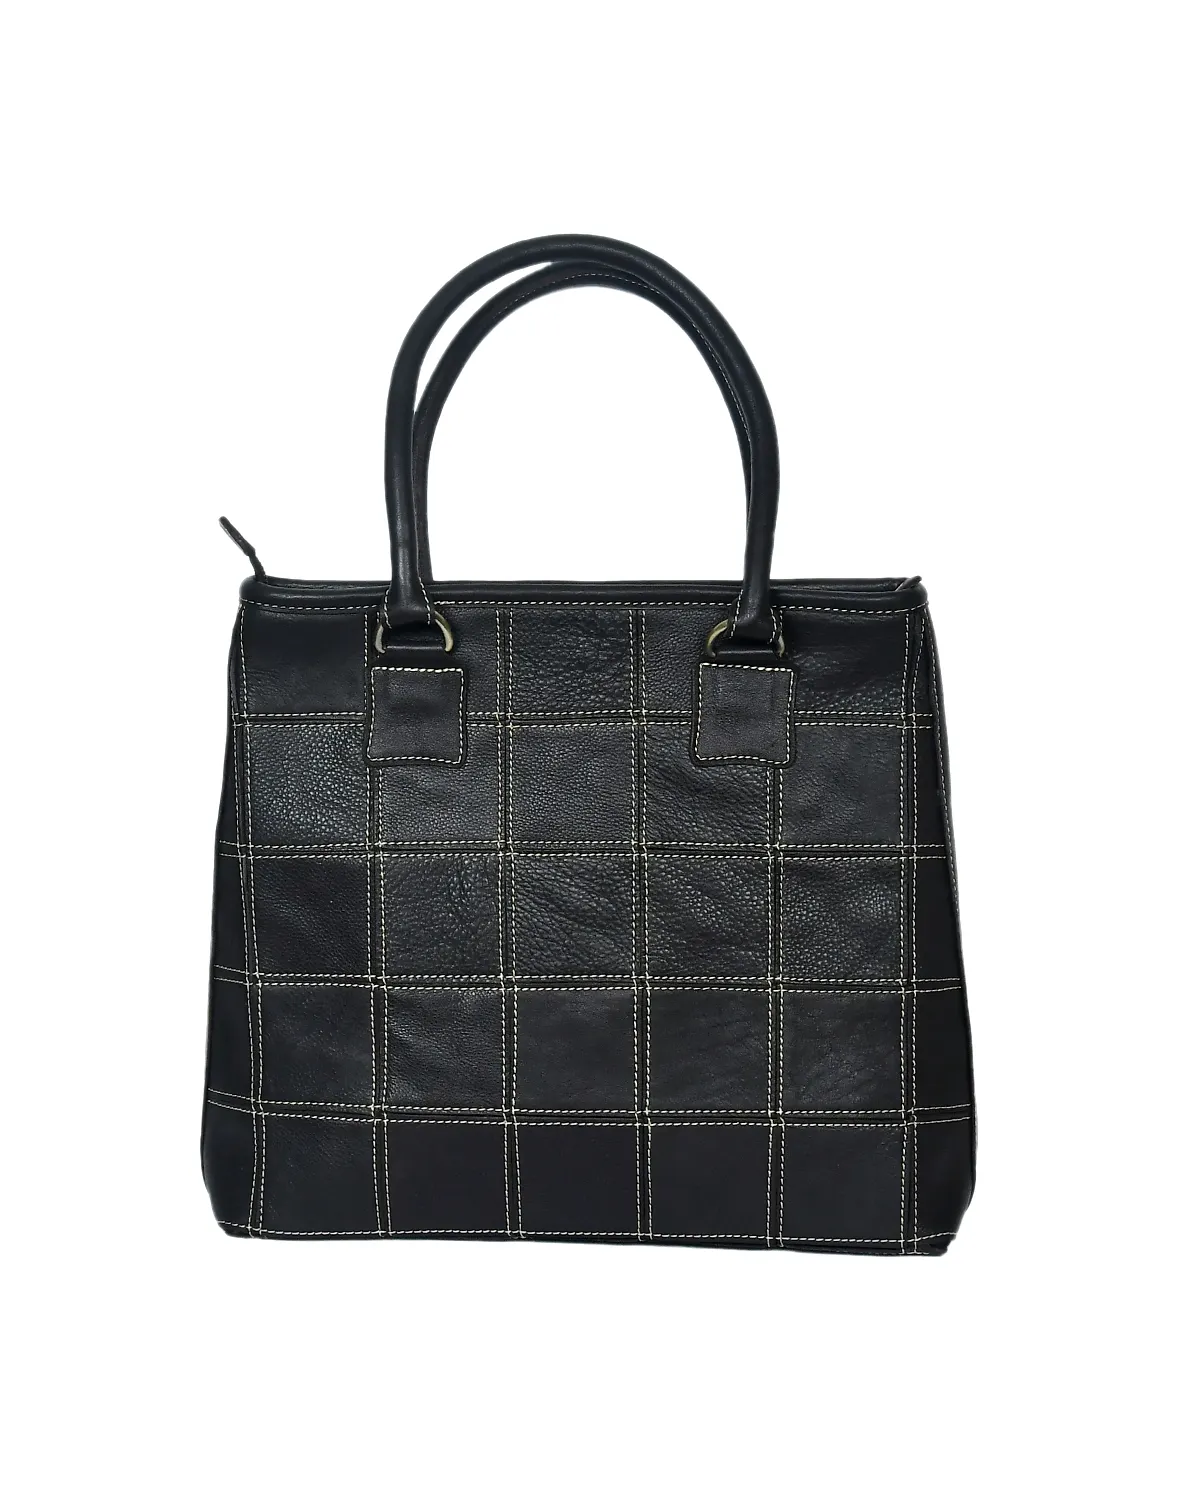 anam exim new black tote bag with beige stitching looks extra storage and real leather product made in India.